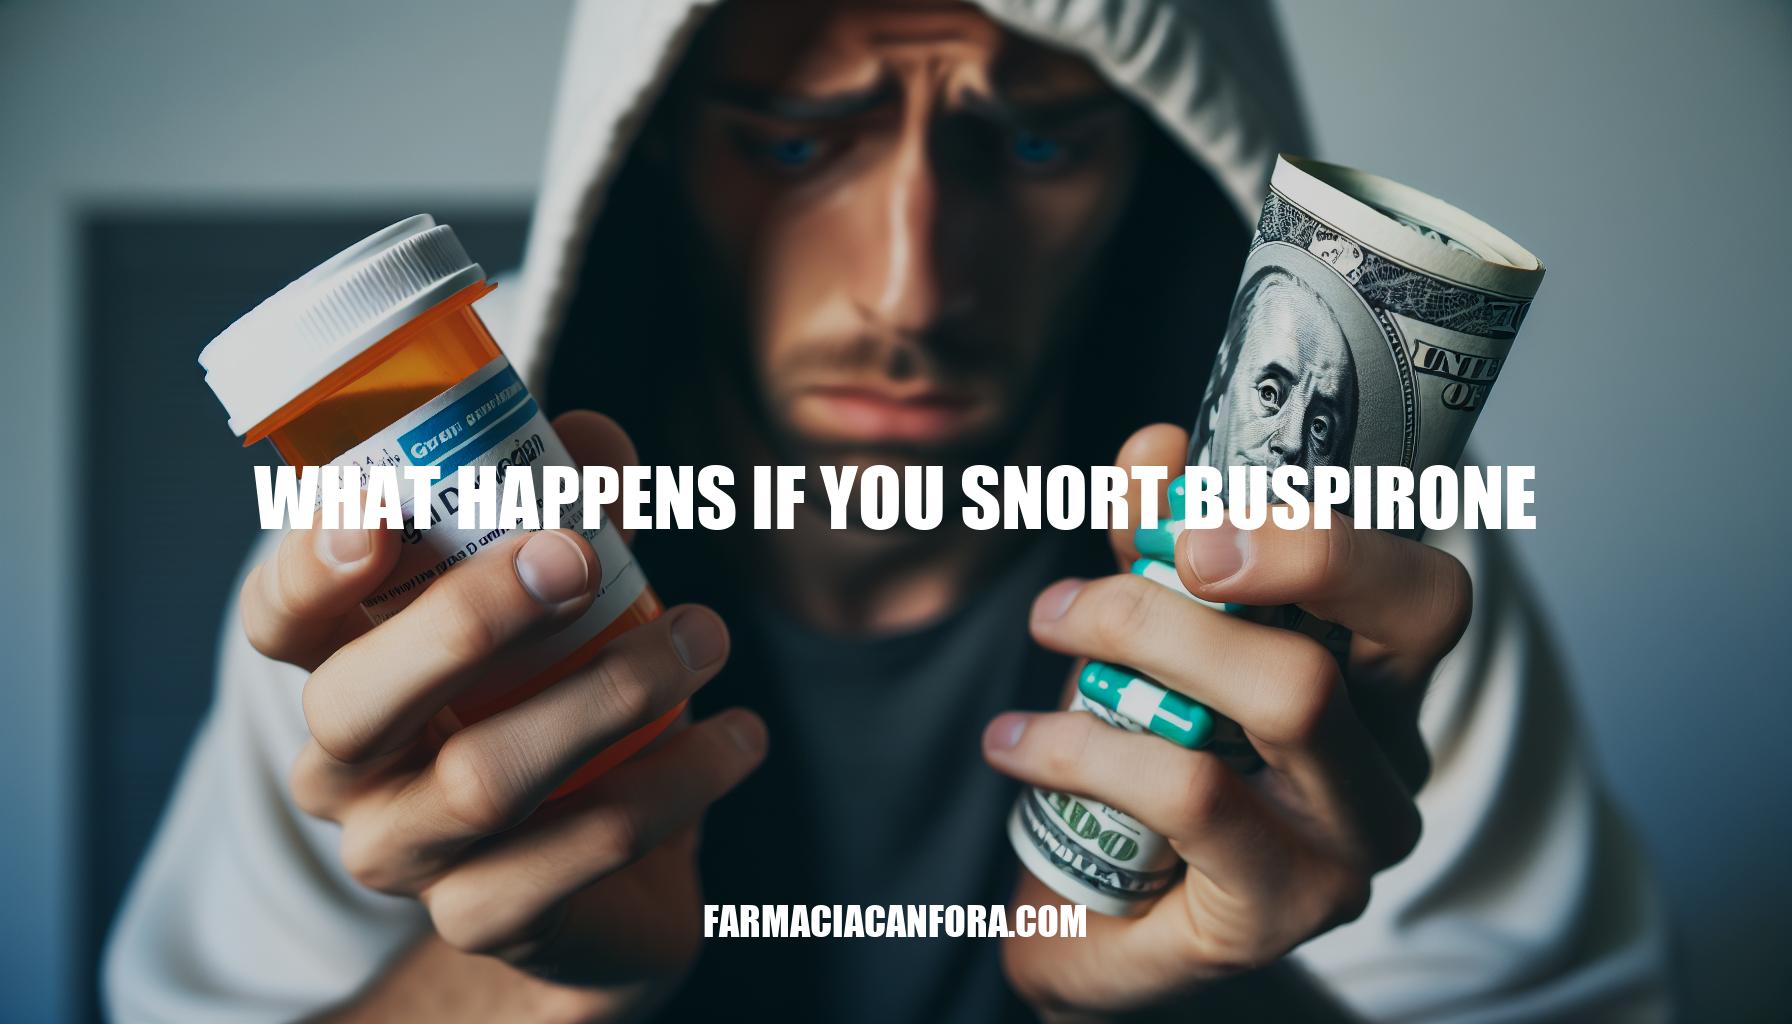 What Happens If You Snort Buspirone: Risks and Consequences